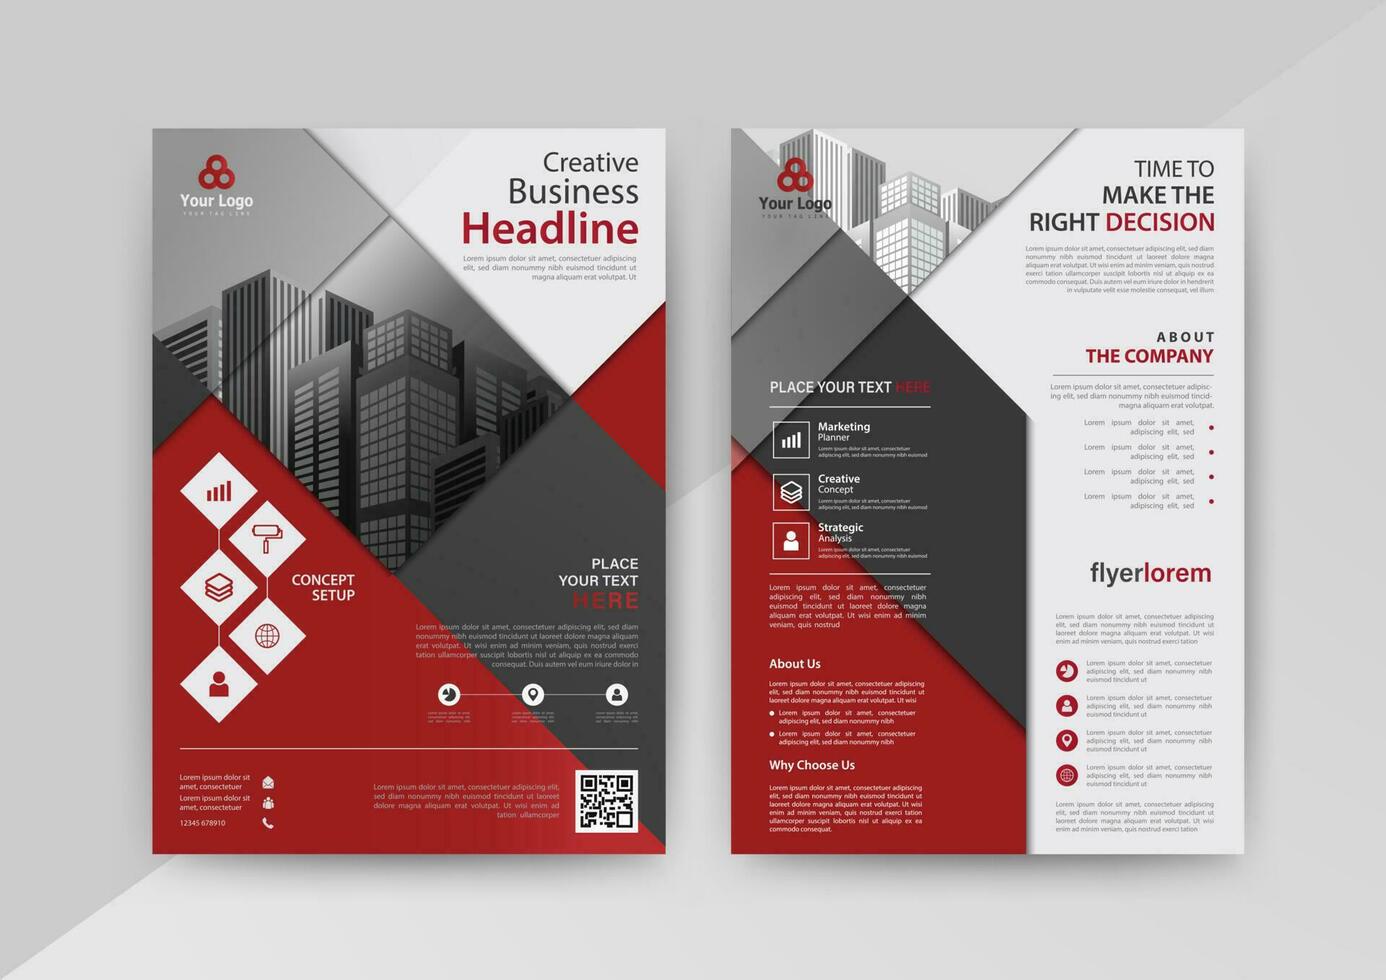 Business abstract vector template for Flyer, Brochure, AnnualReport, Magazine, Poster, Corporate Presentation, Portfolio, Market, infographic with Red and Black color size A4, Front and back.